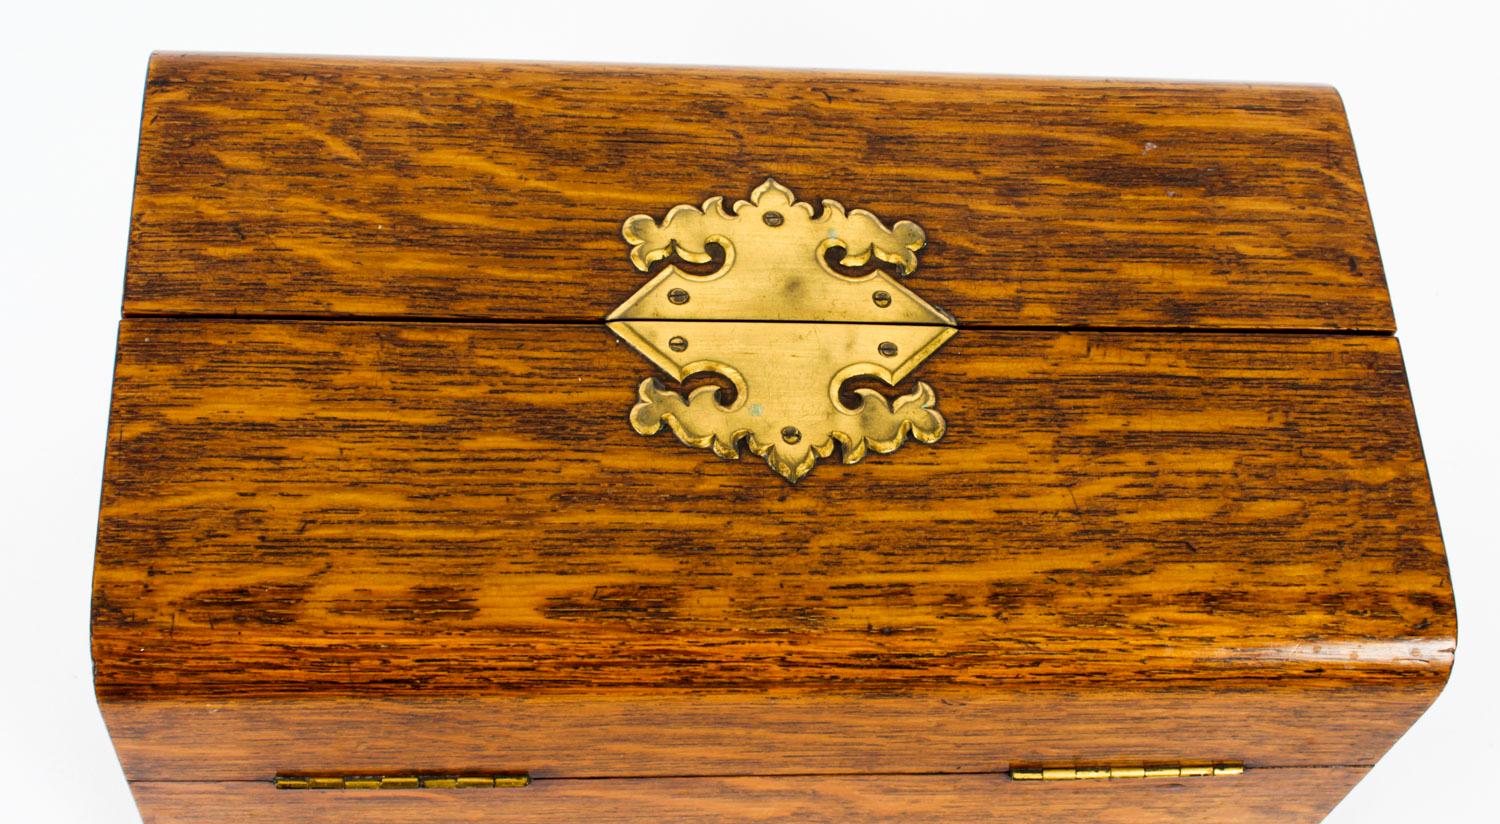 English Antique Victorian Oak Cigar Humidor Casket by H. Greaves, 19th Century